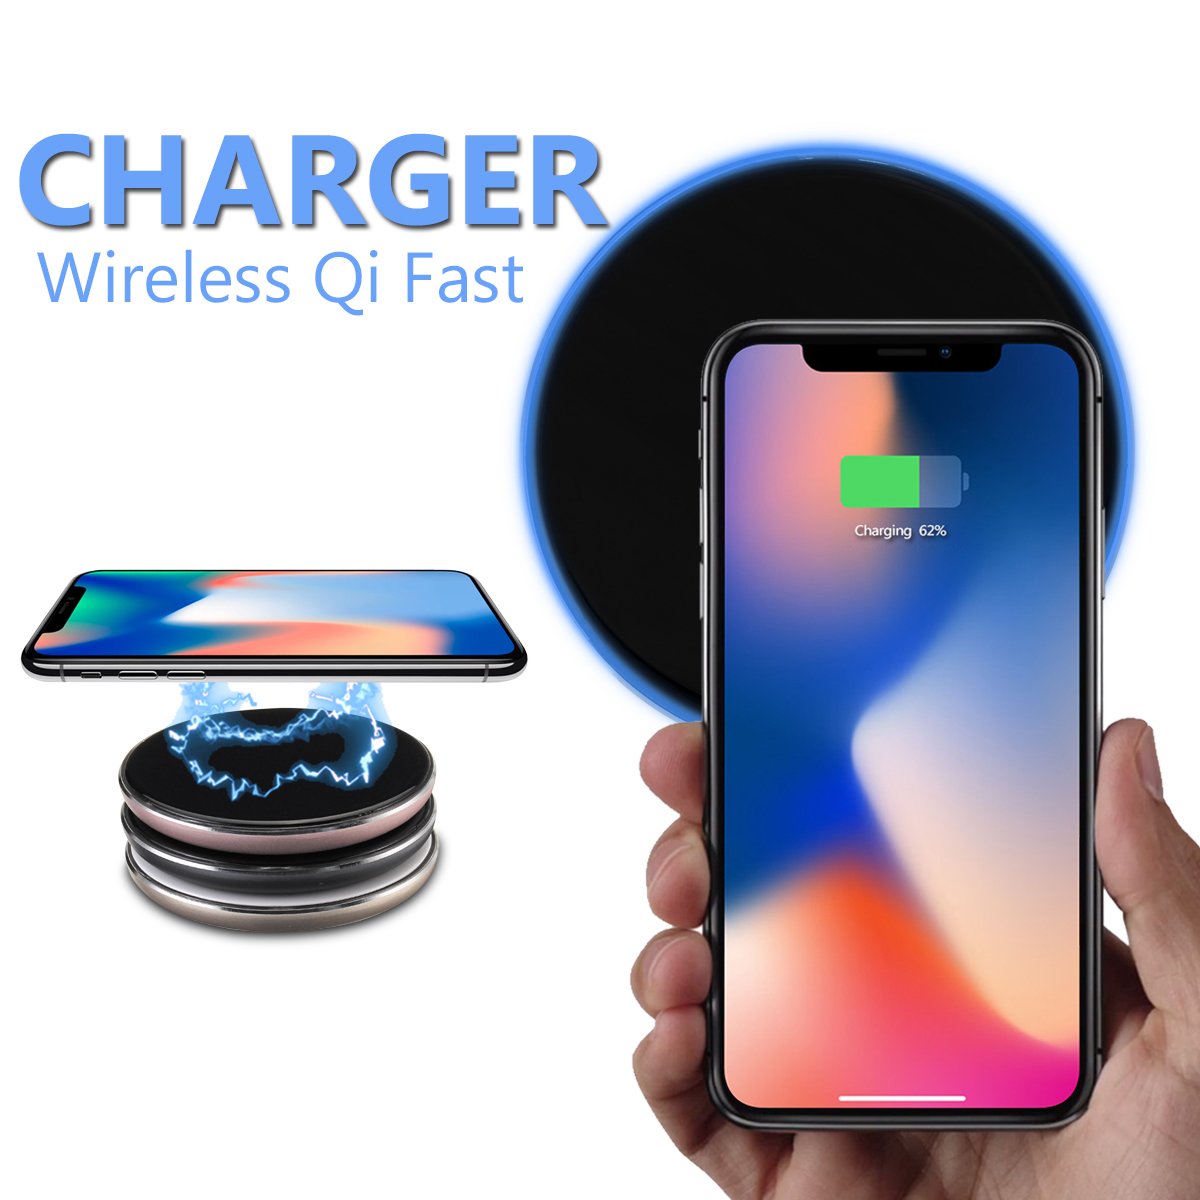 Bakeey Qi Wireless Charger With LED Light For iPhone X 8 8Plus Samsung S8 S7 Edge Note 8